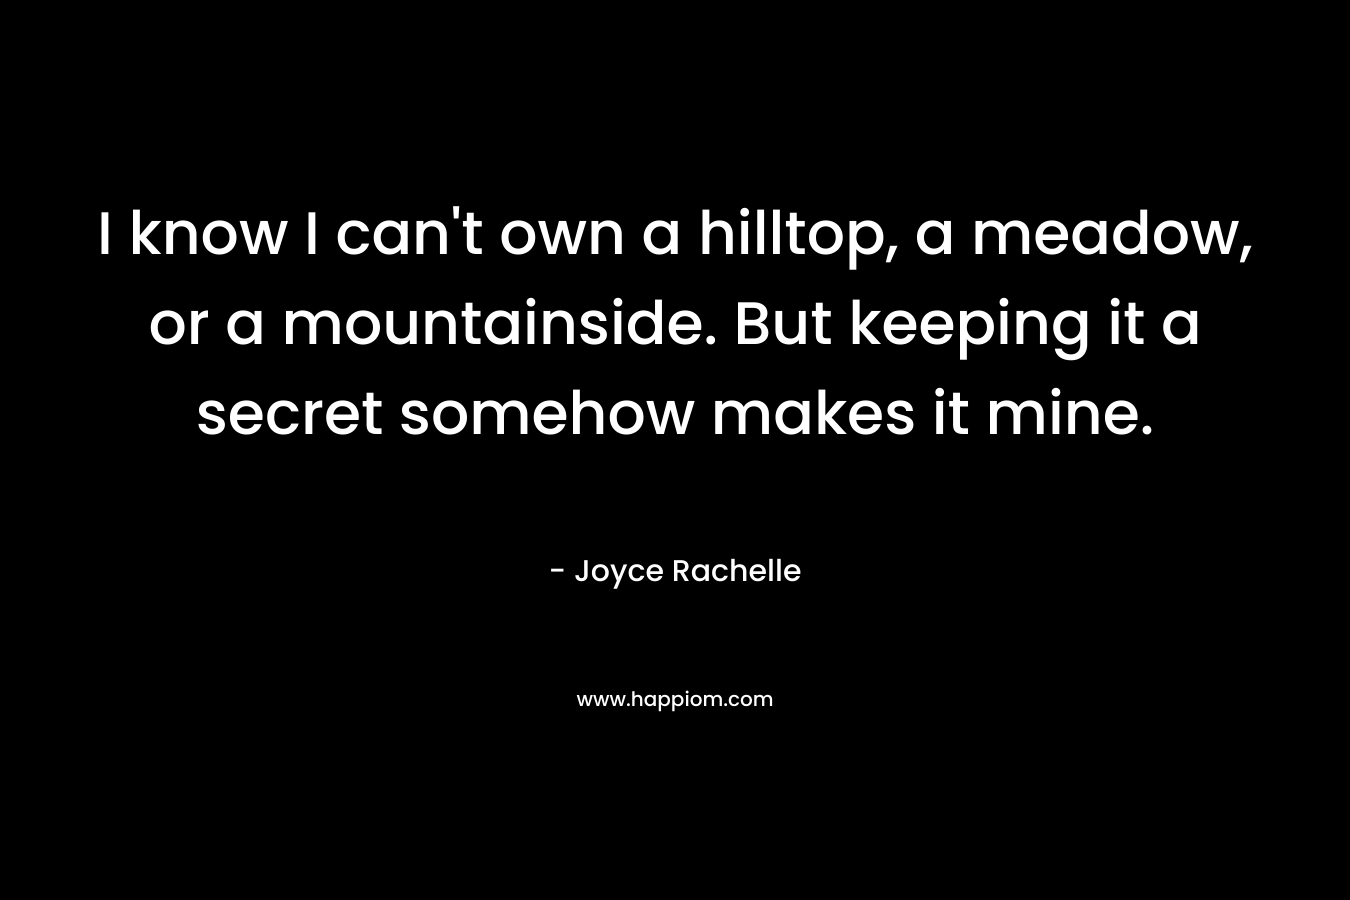 I know I can’t own a hilltop, a meadow, or a mountainside. But keeping it a secret somehow makes it mine. – Joyce Rachelle